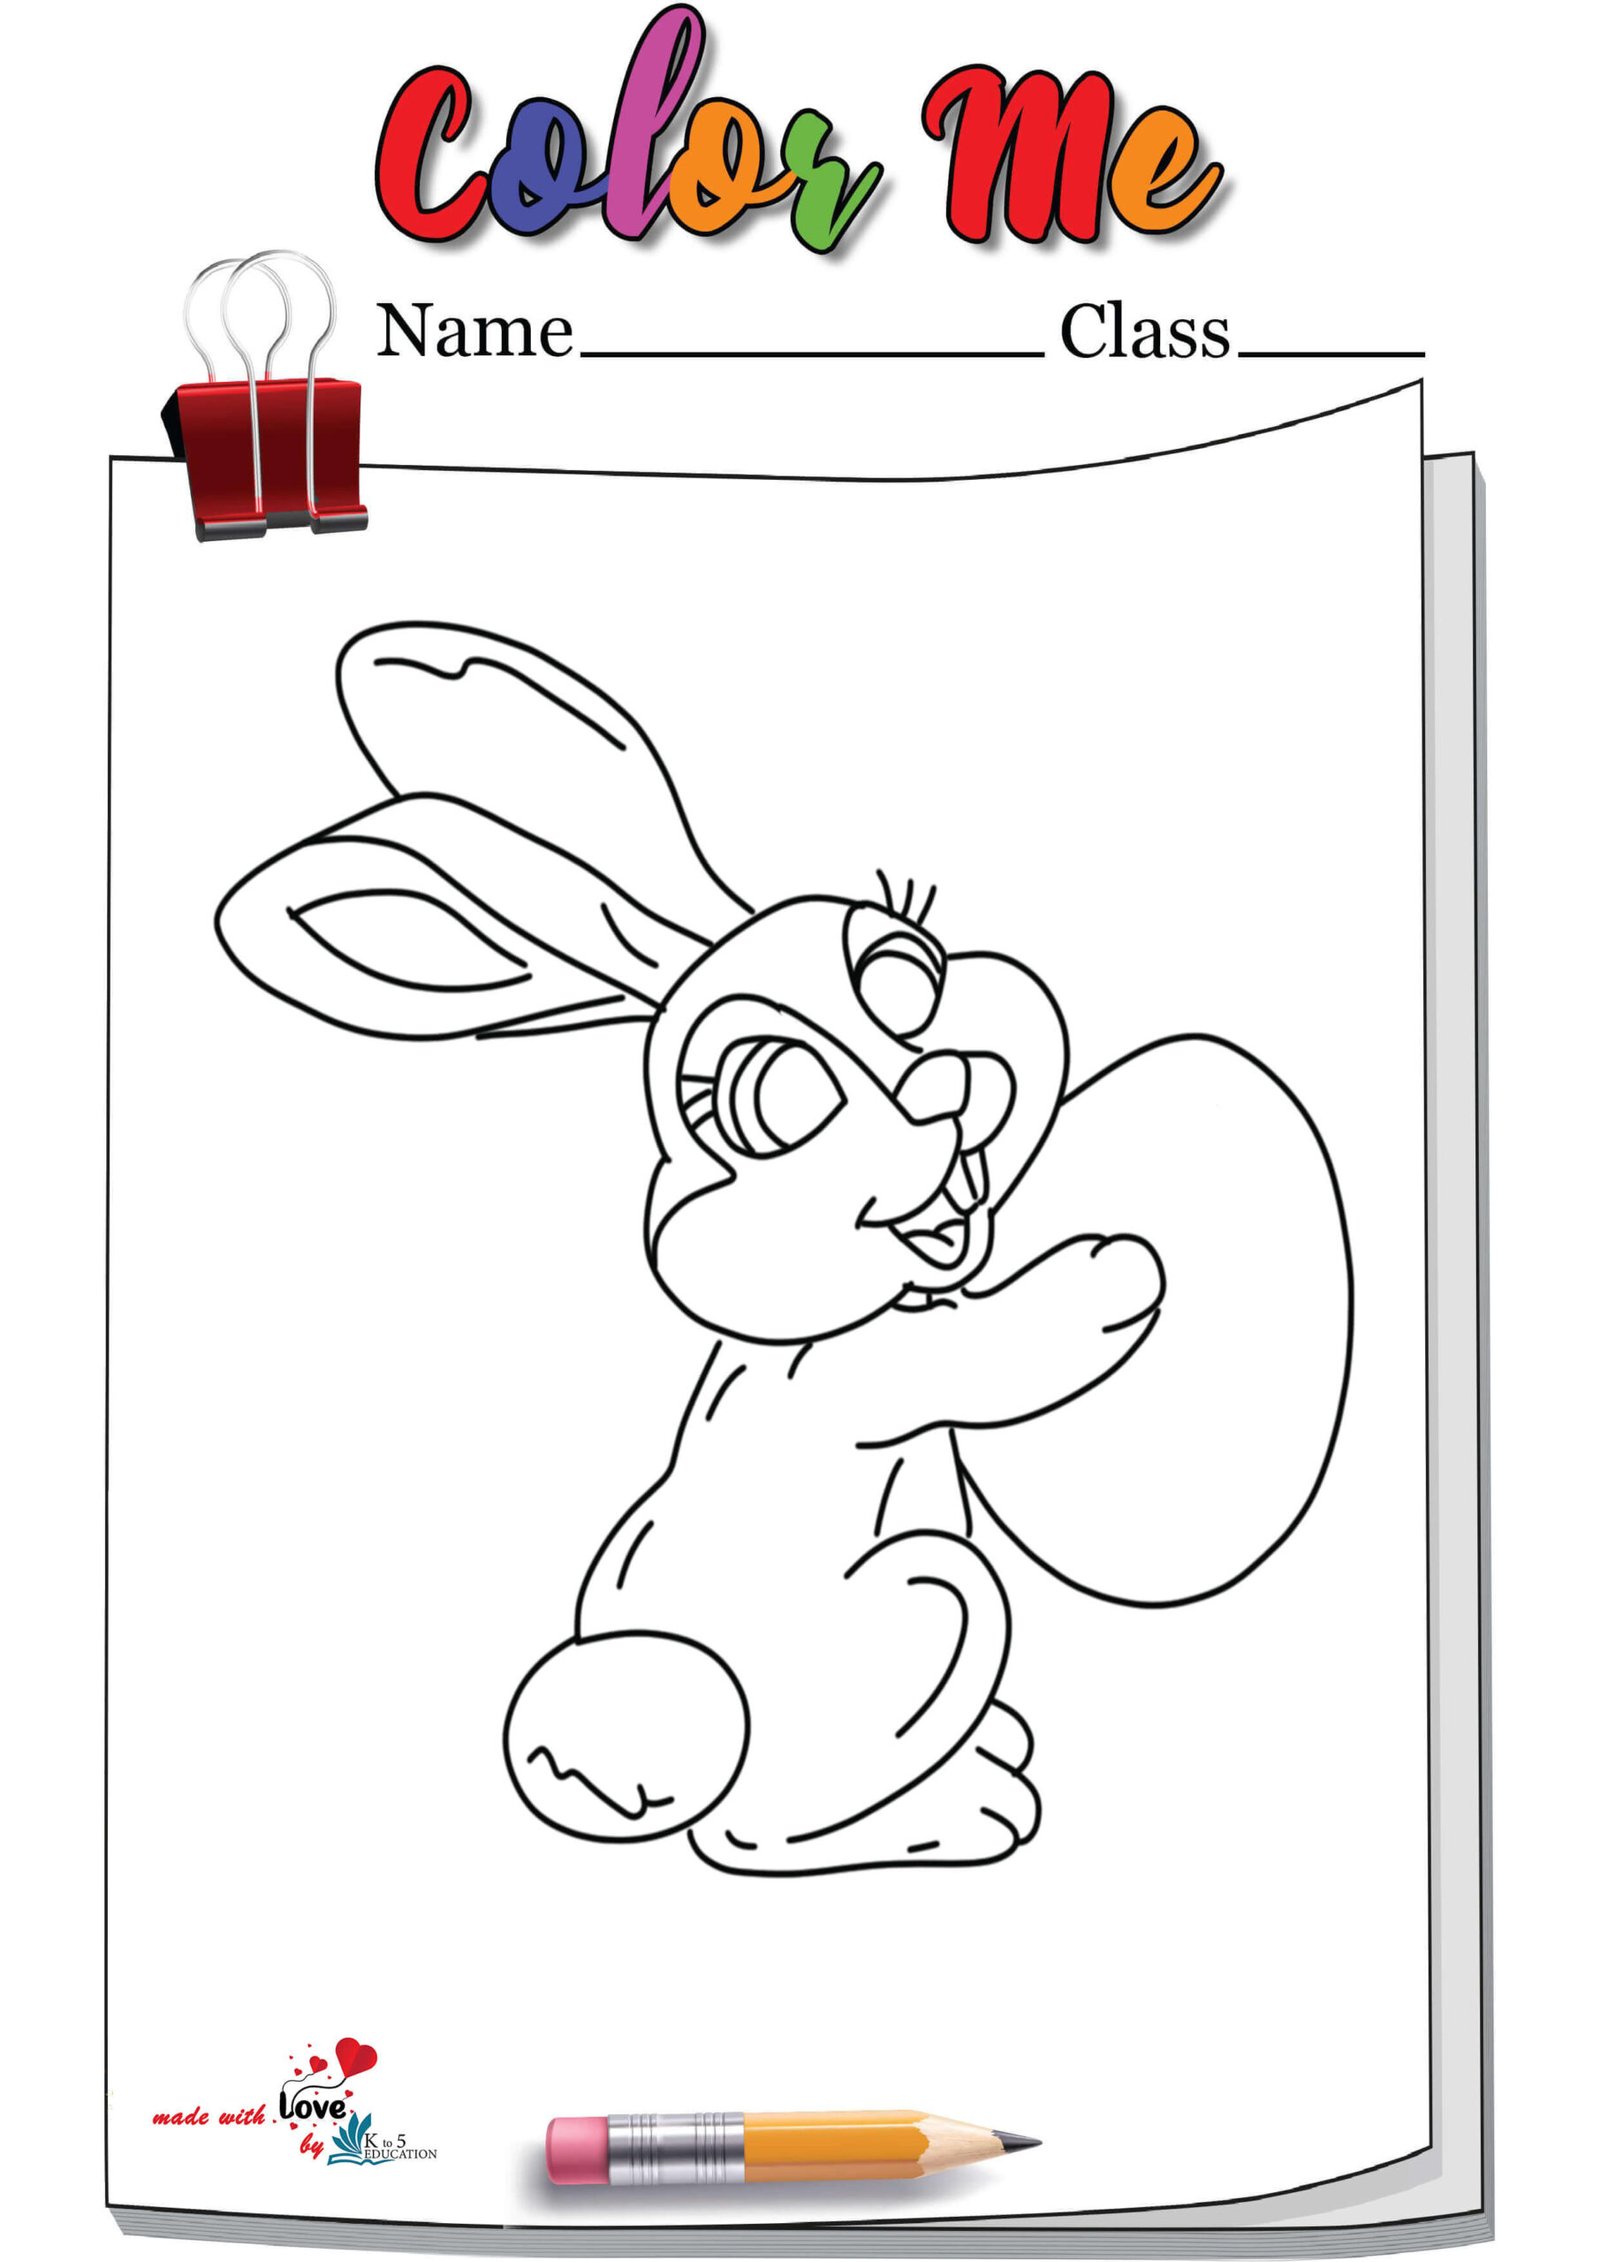 Bunny Playing With Egg Coloring Page